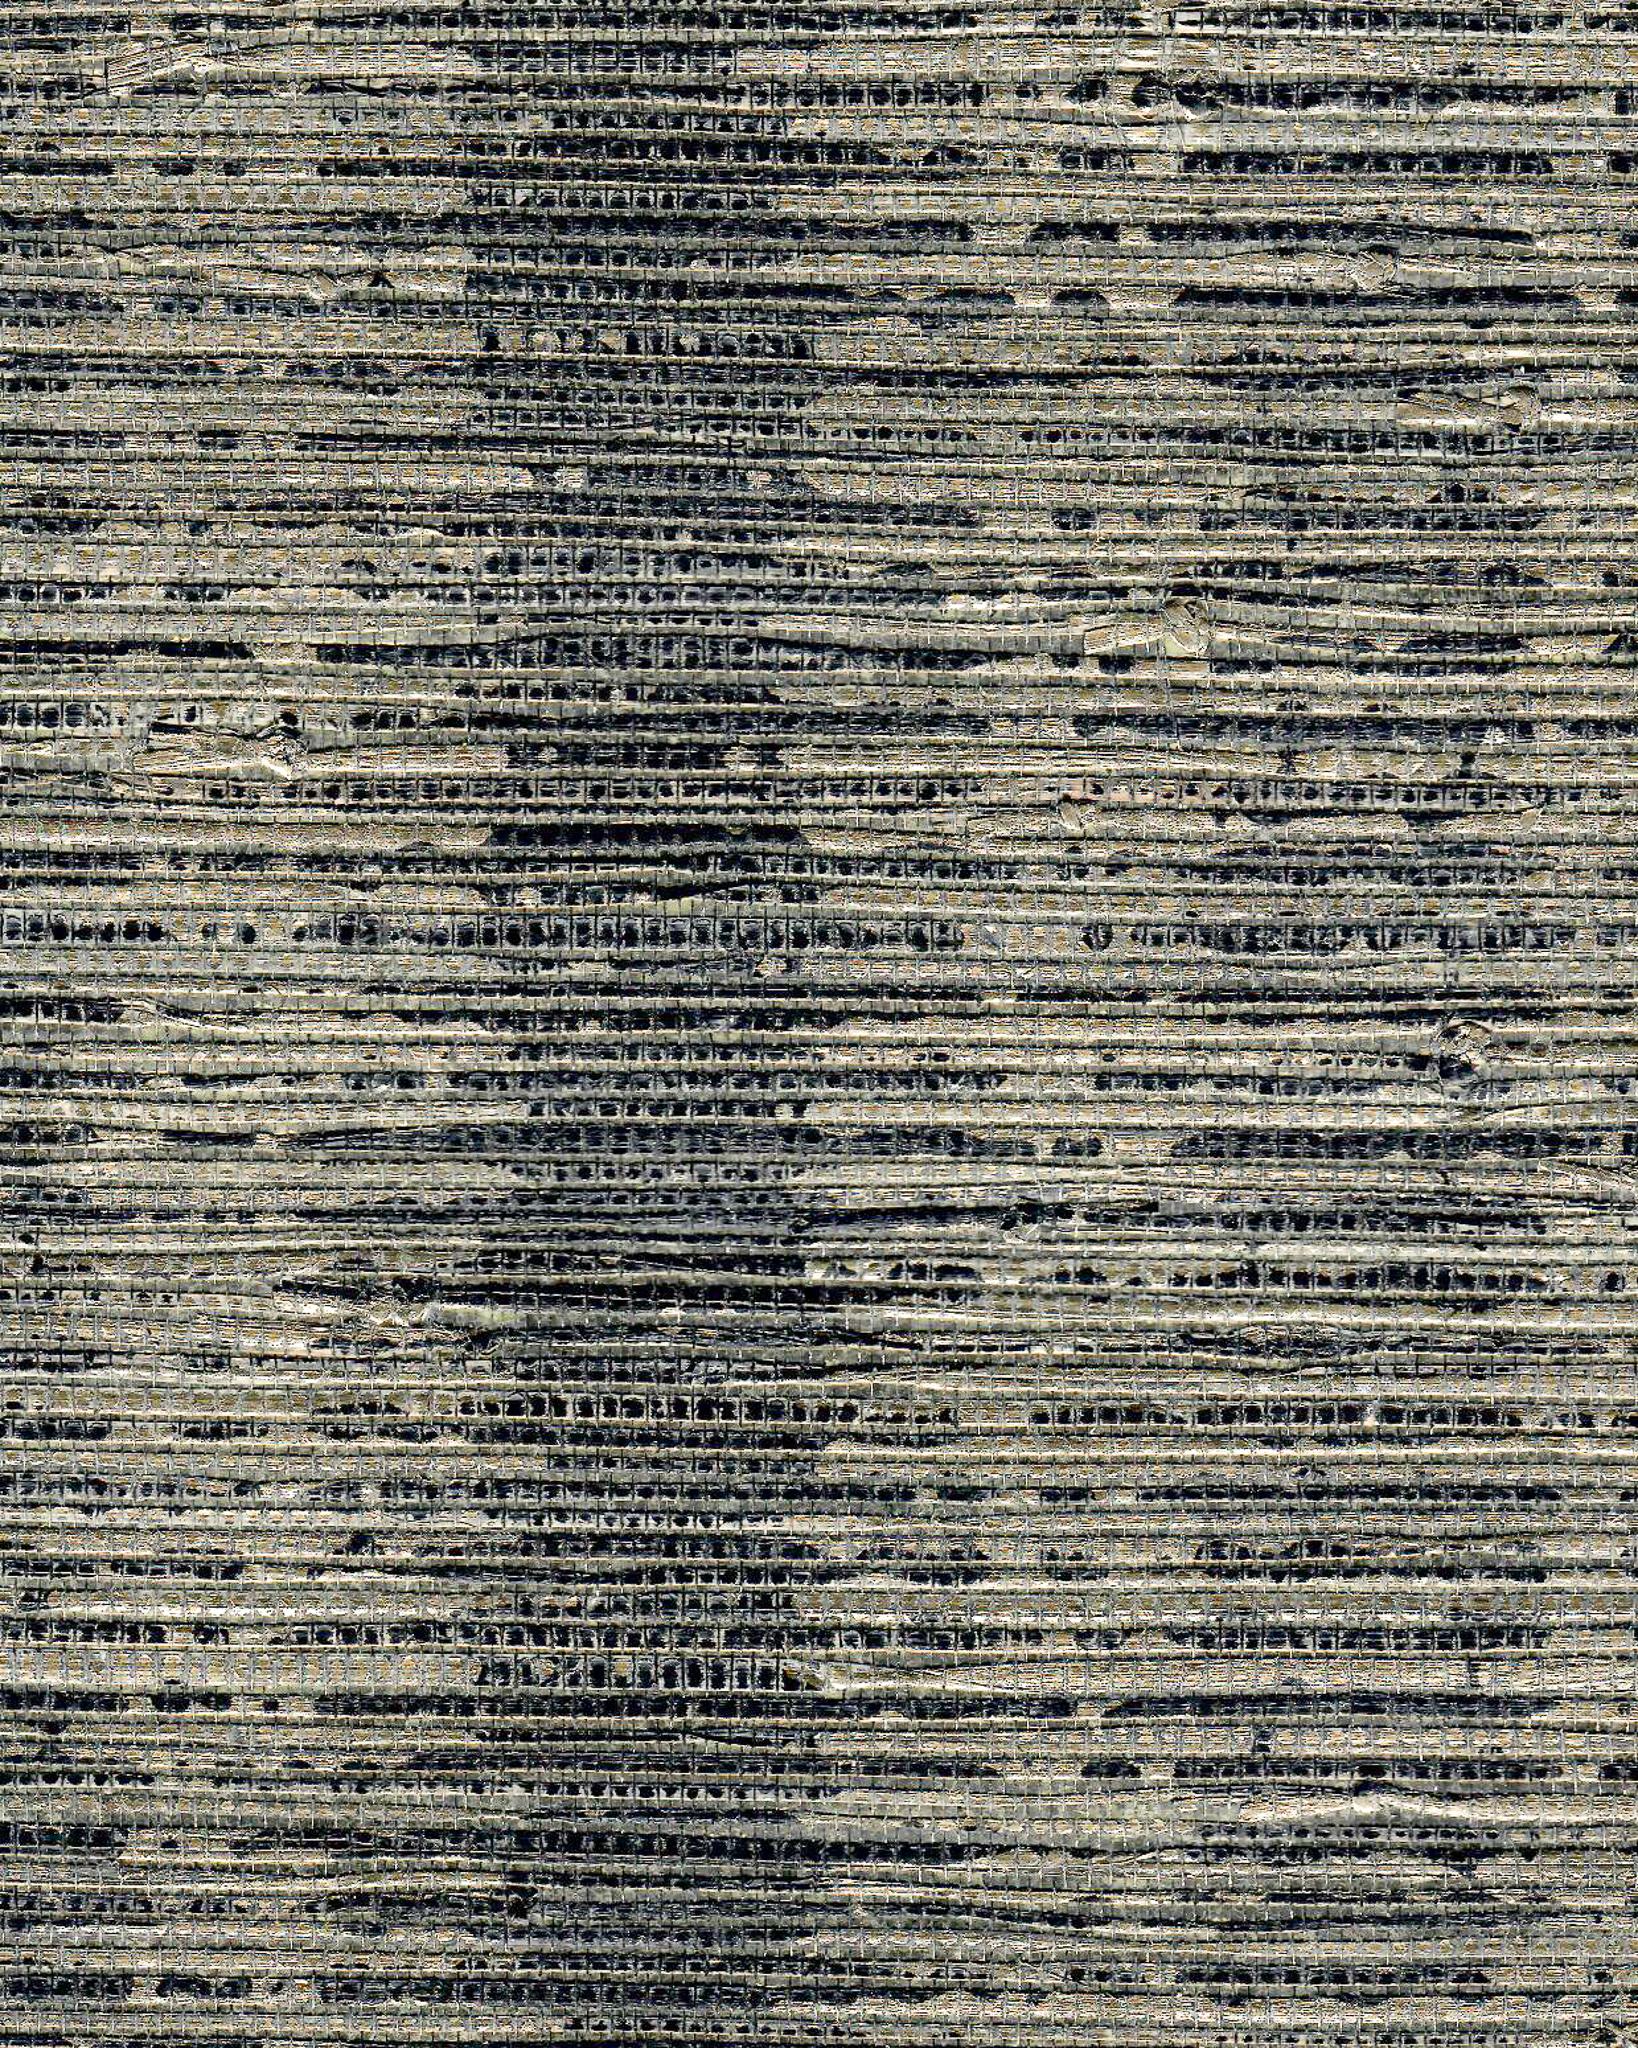 Tour De Force printed wall-covering. This textured wall-covering is composed of wood strips, digitally printed with a line pattern in metallic and non-metallic inks, mounted on a foil covered non-woven paper back.

Maison Nurita carries an